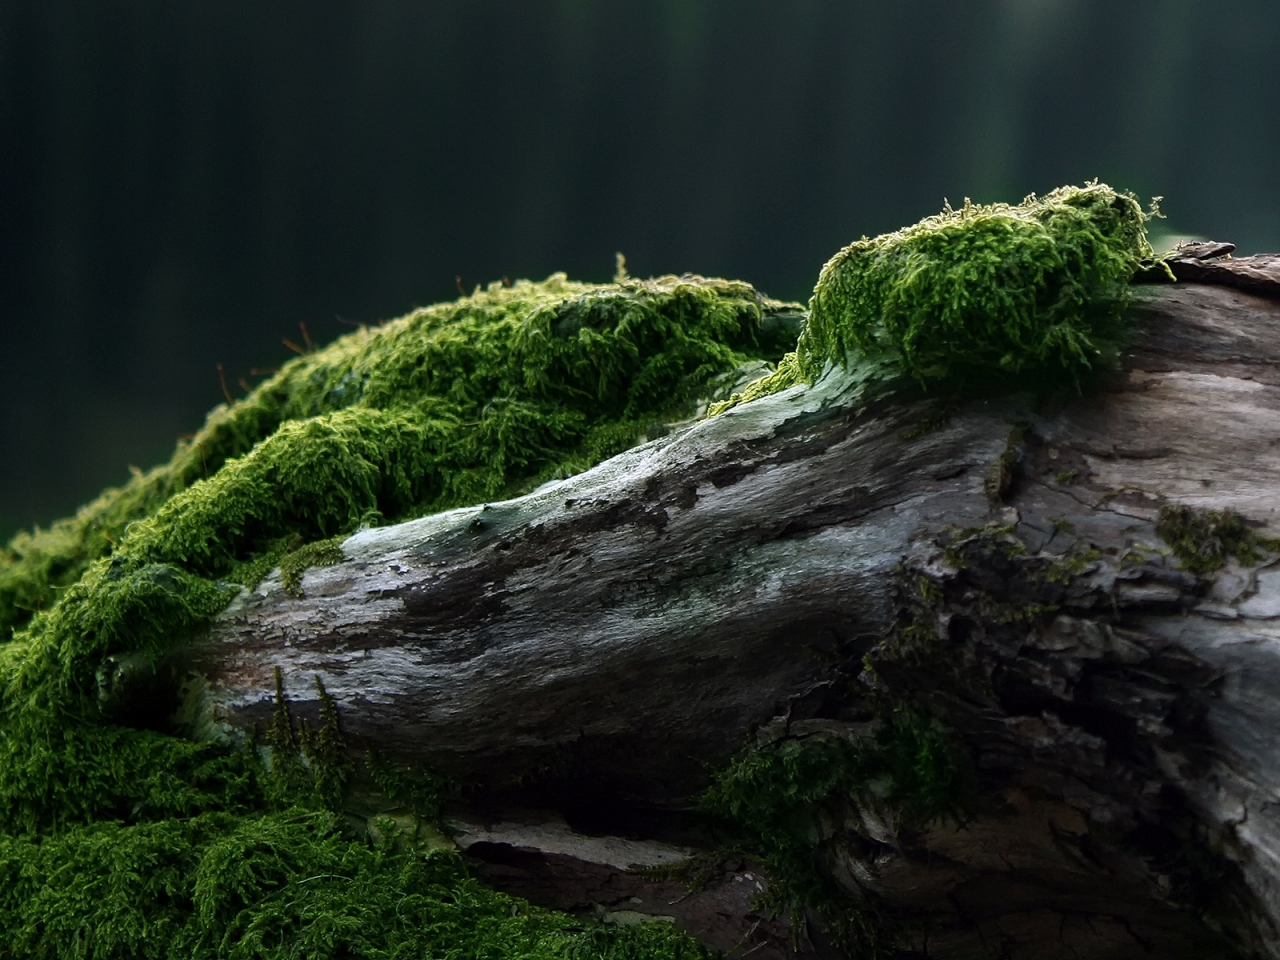 Moss for 1280 x 960 resolution